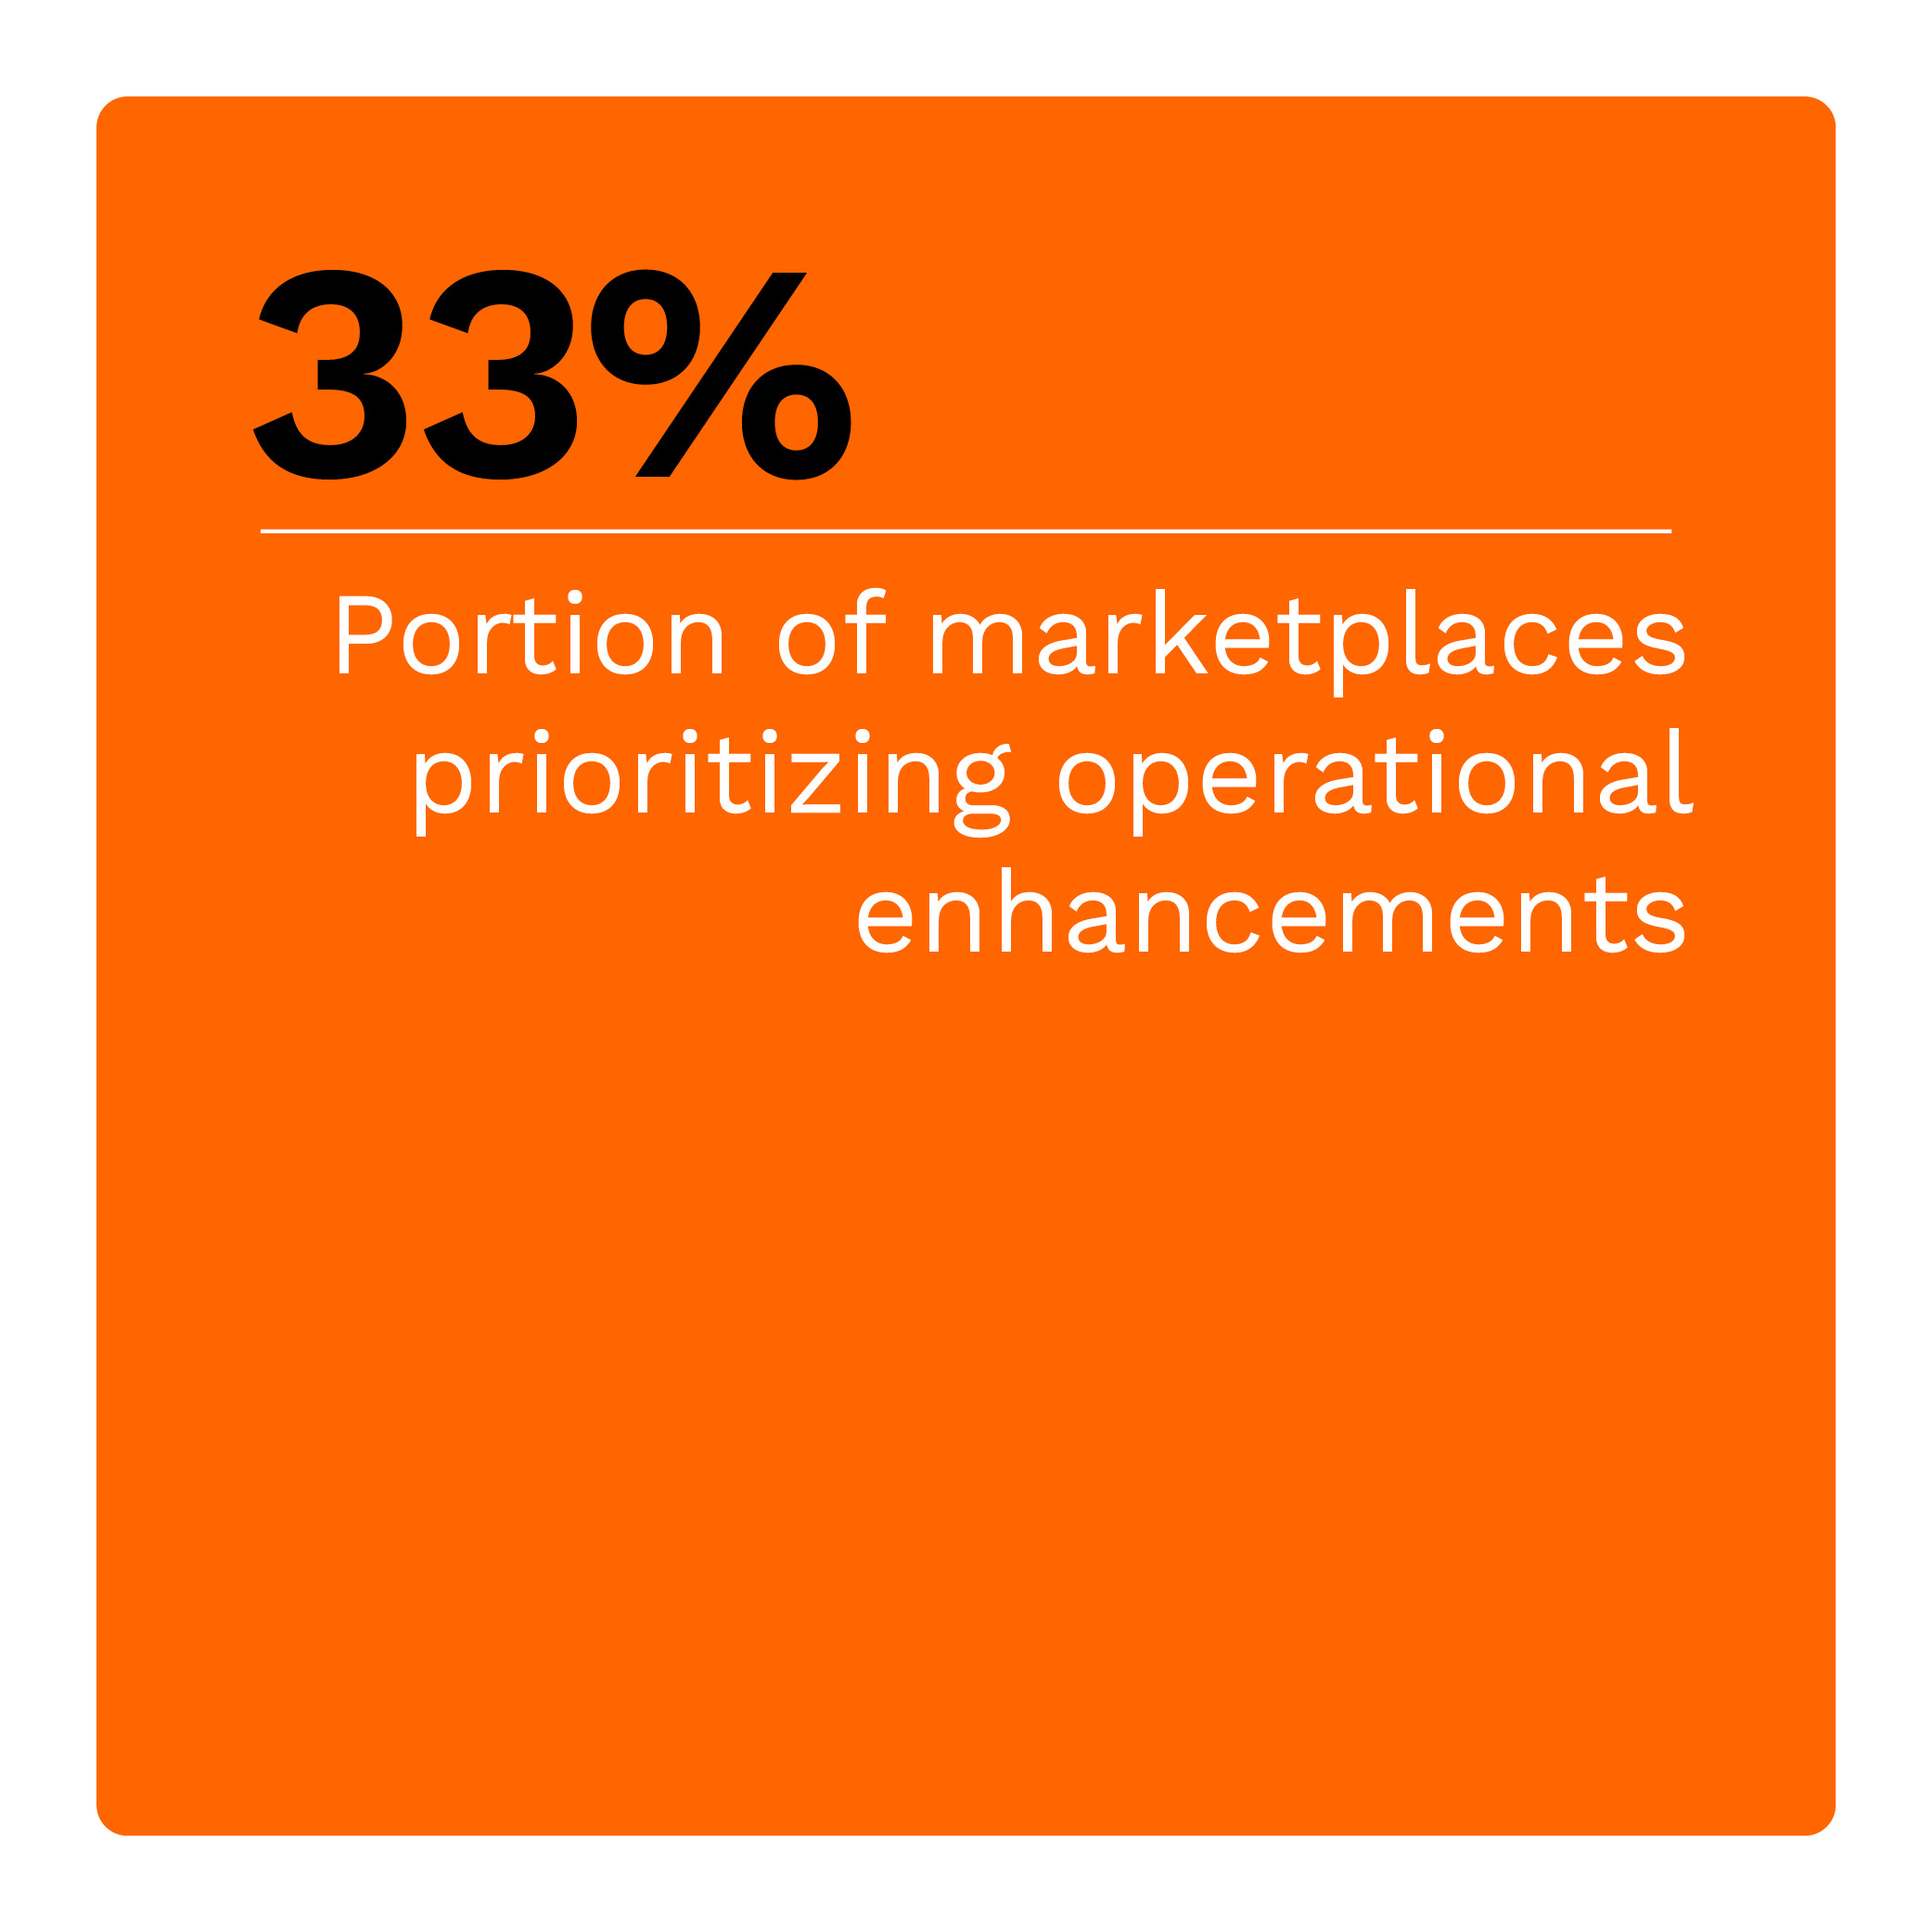  Portion of marketplaces prioritizing operational enhancements